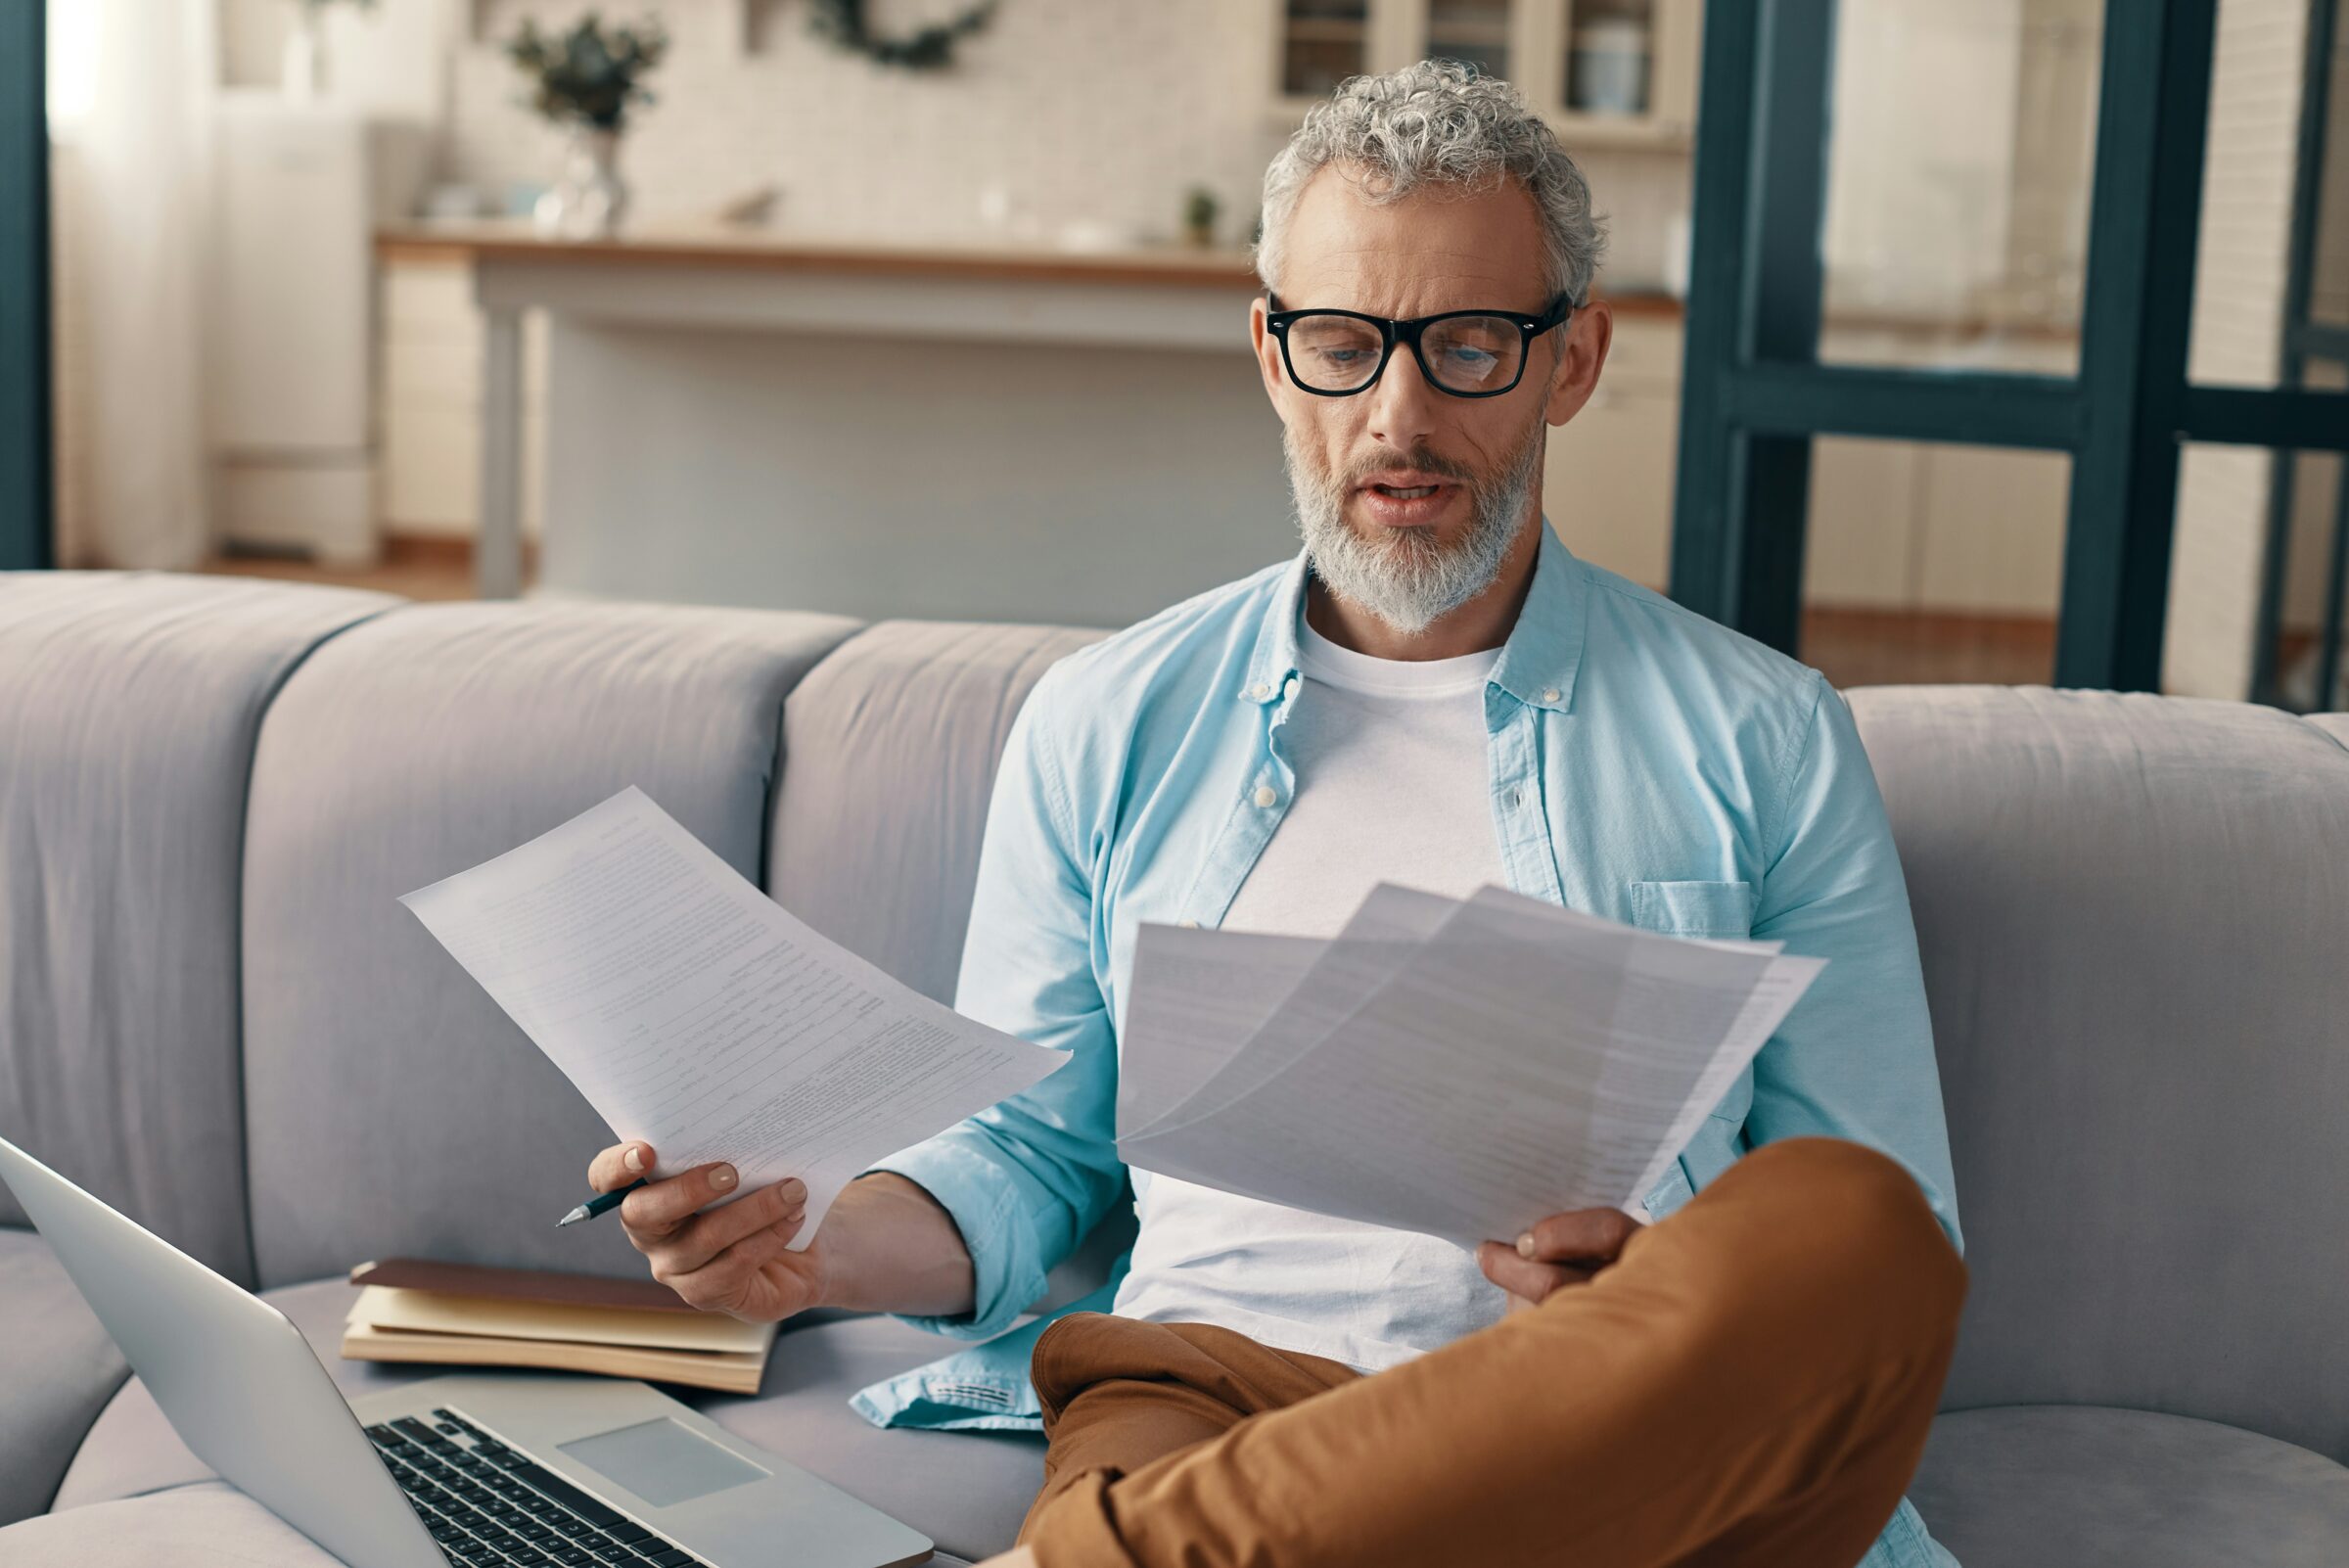 Man sitting on the couch reviewing travel insurance papers